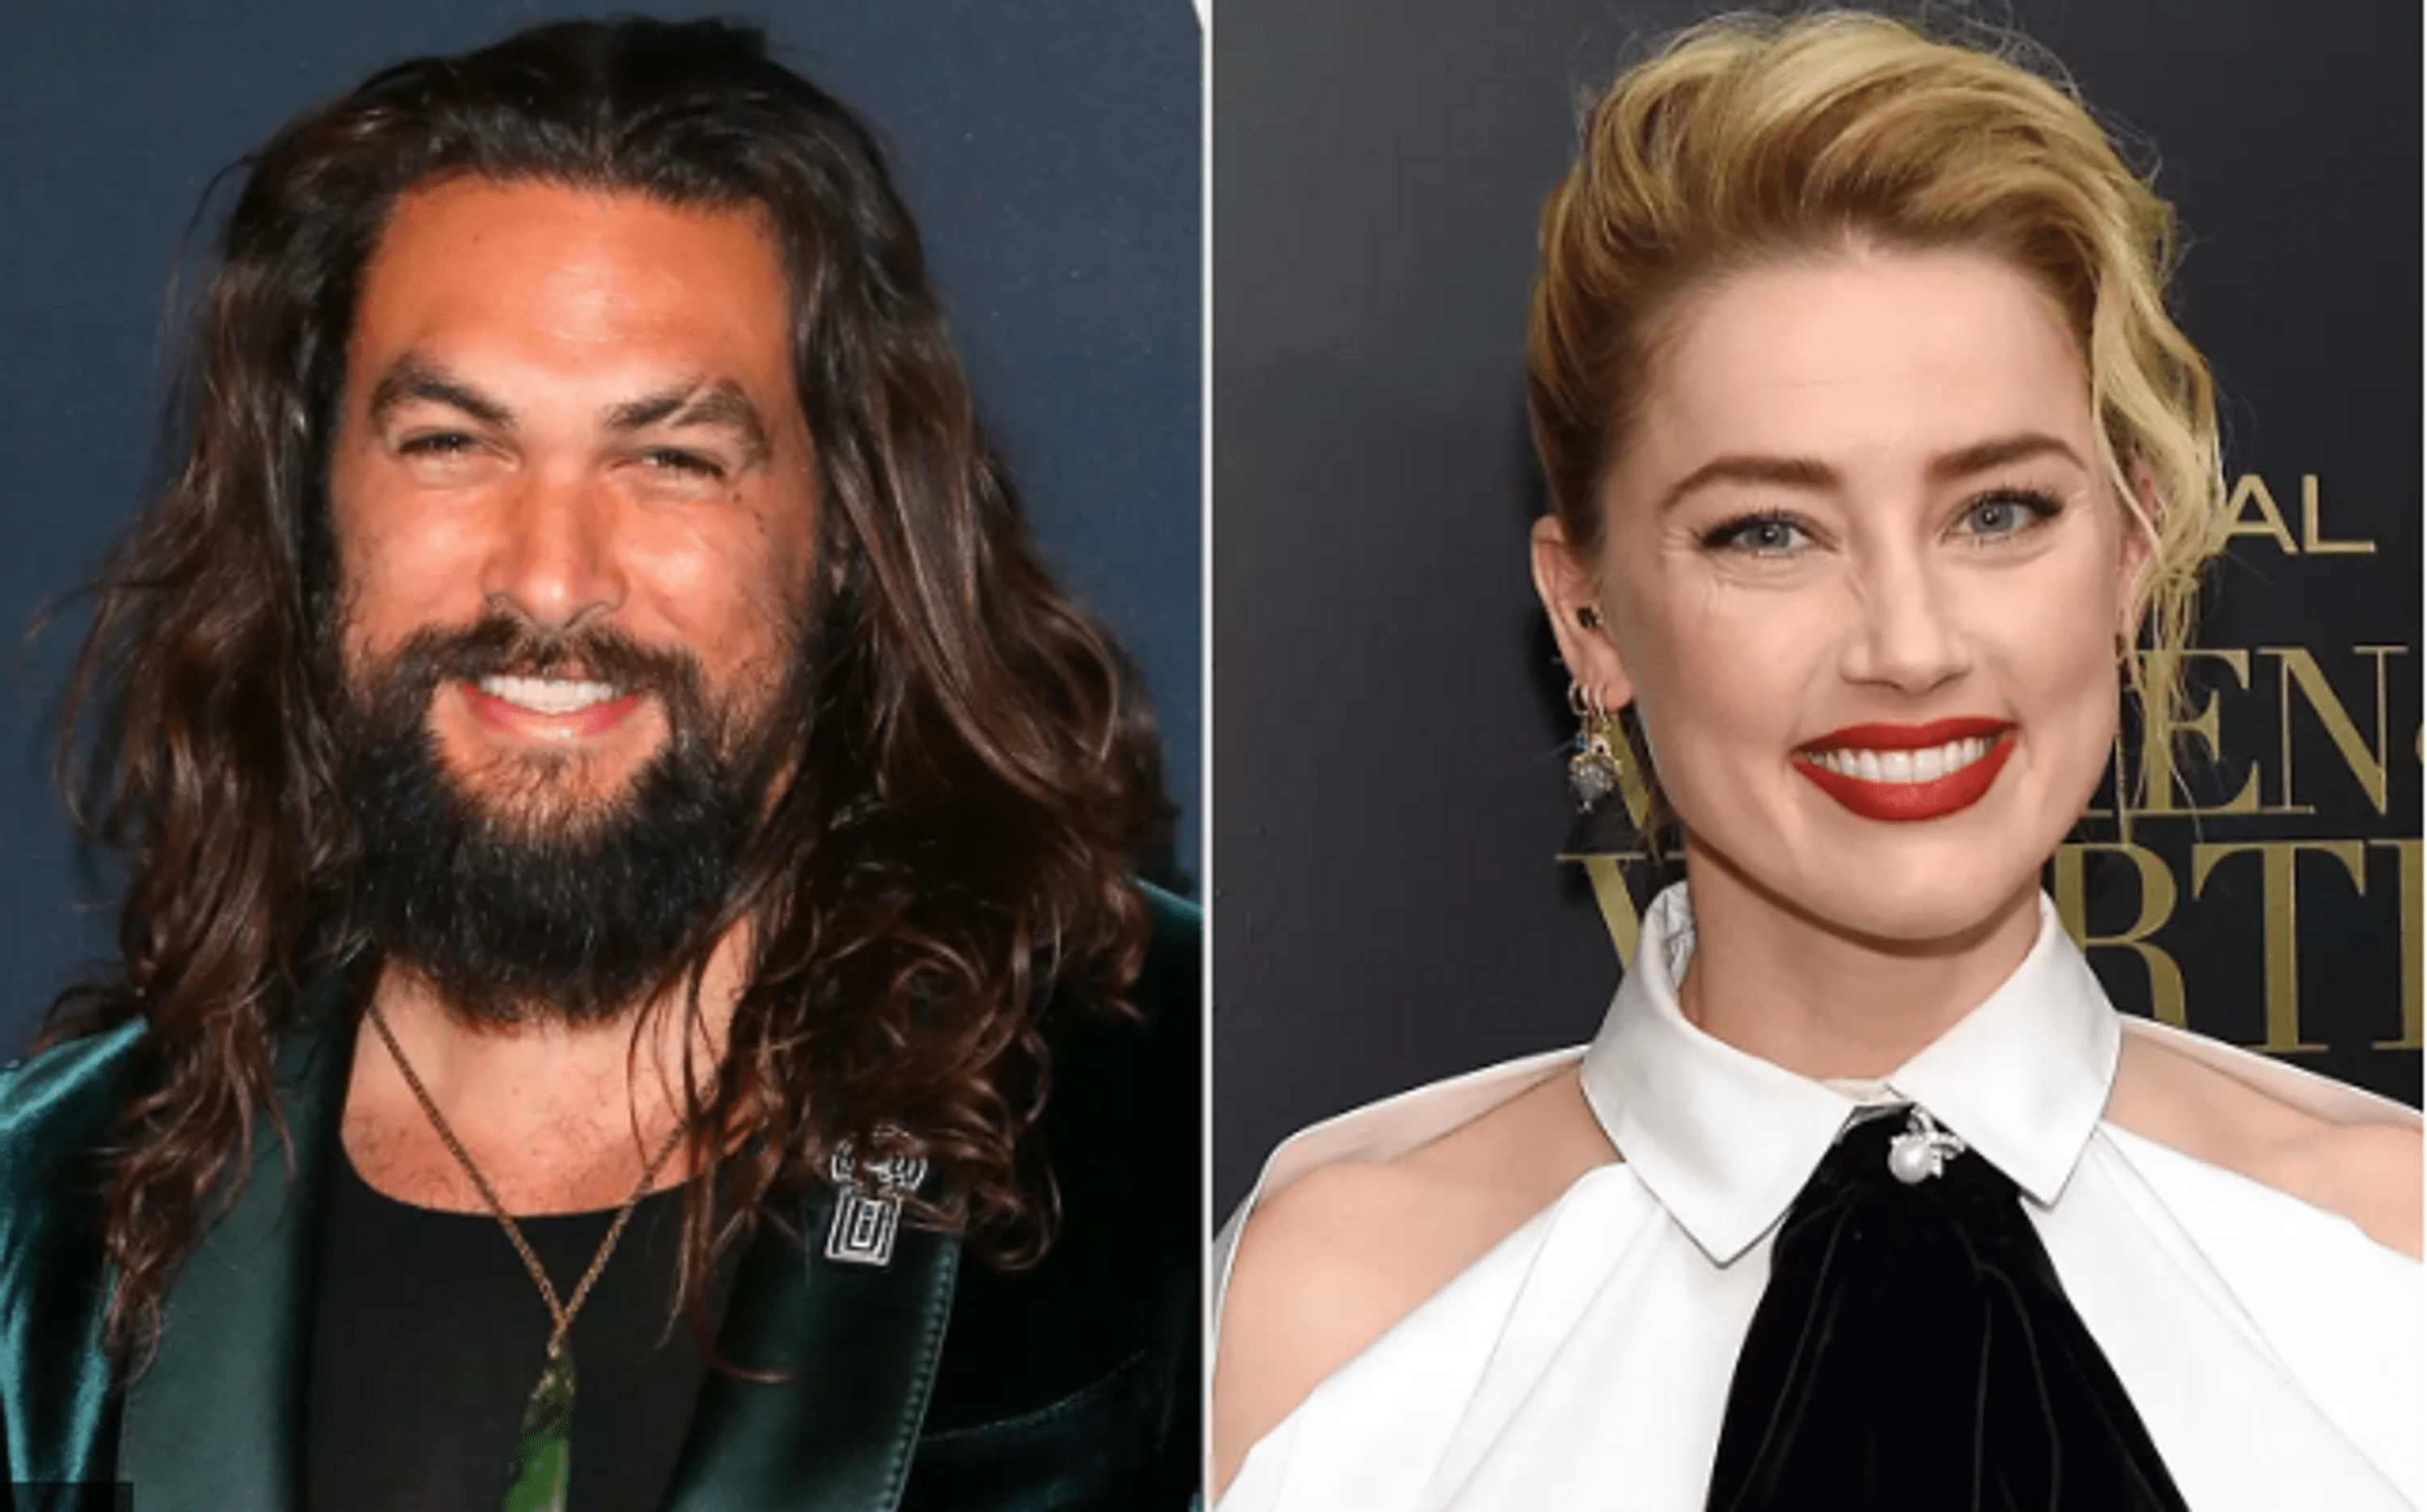 amber-heards-agent-was-told-that-the-reason-for-cutting-her-role-in-aquaman-2-was-the-lack-of-chemistry-with-jason-momoa